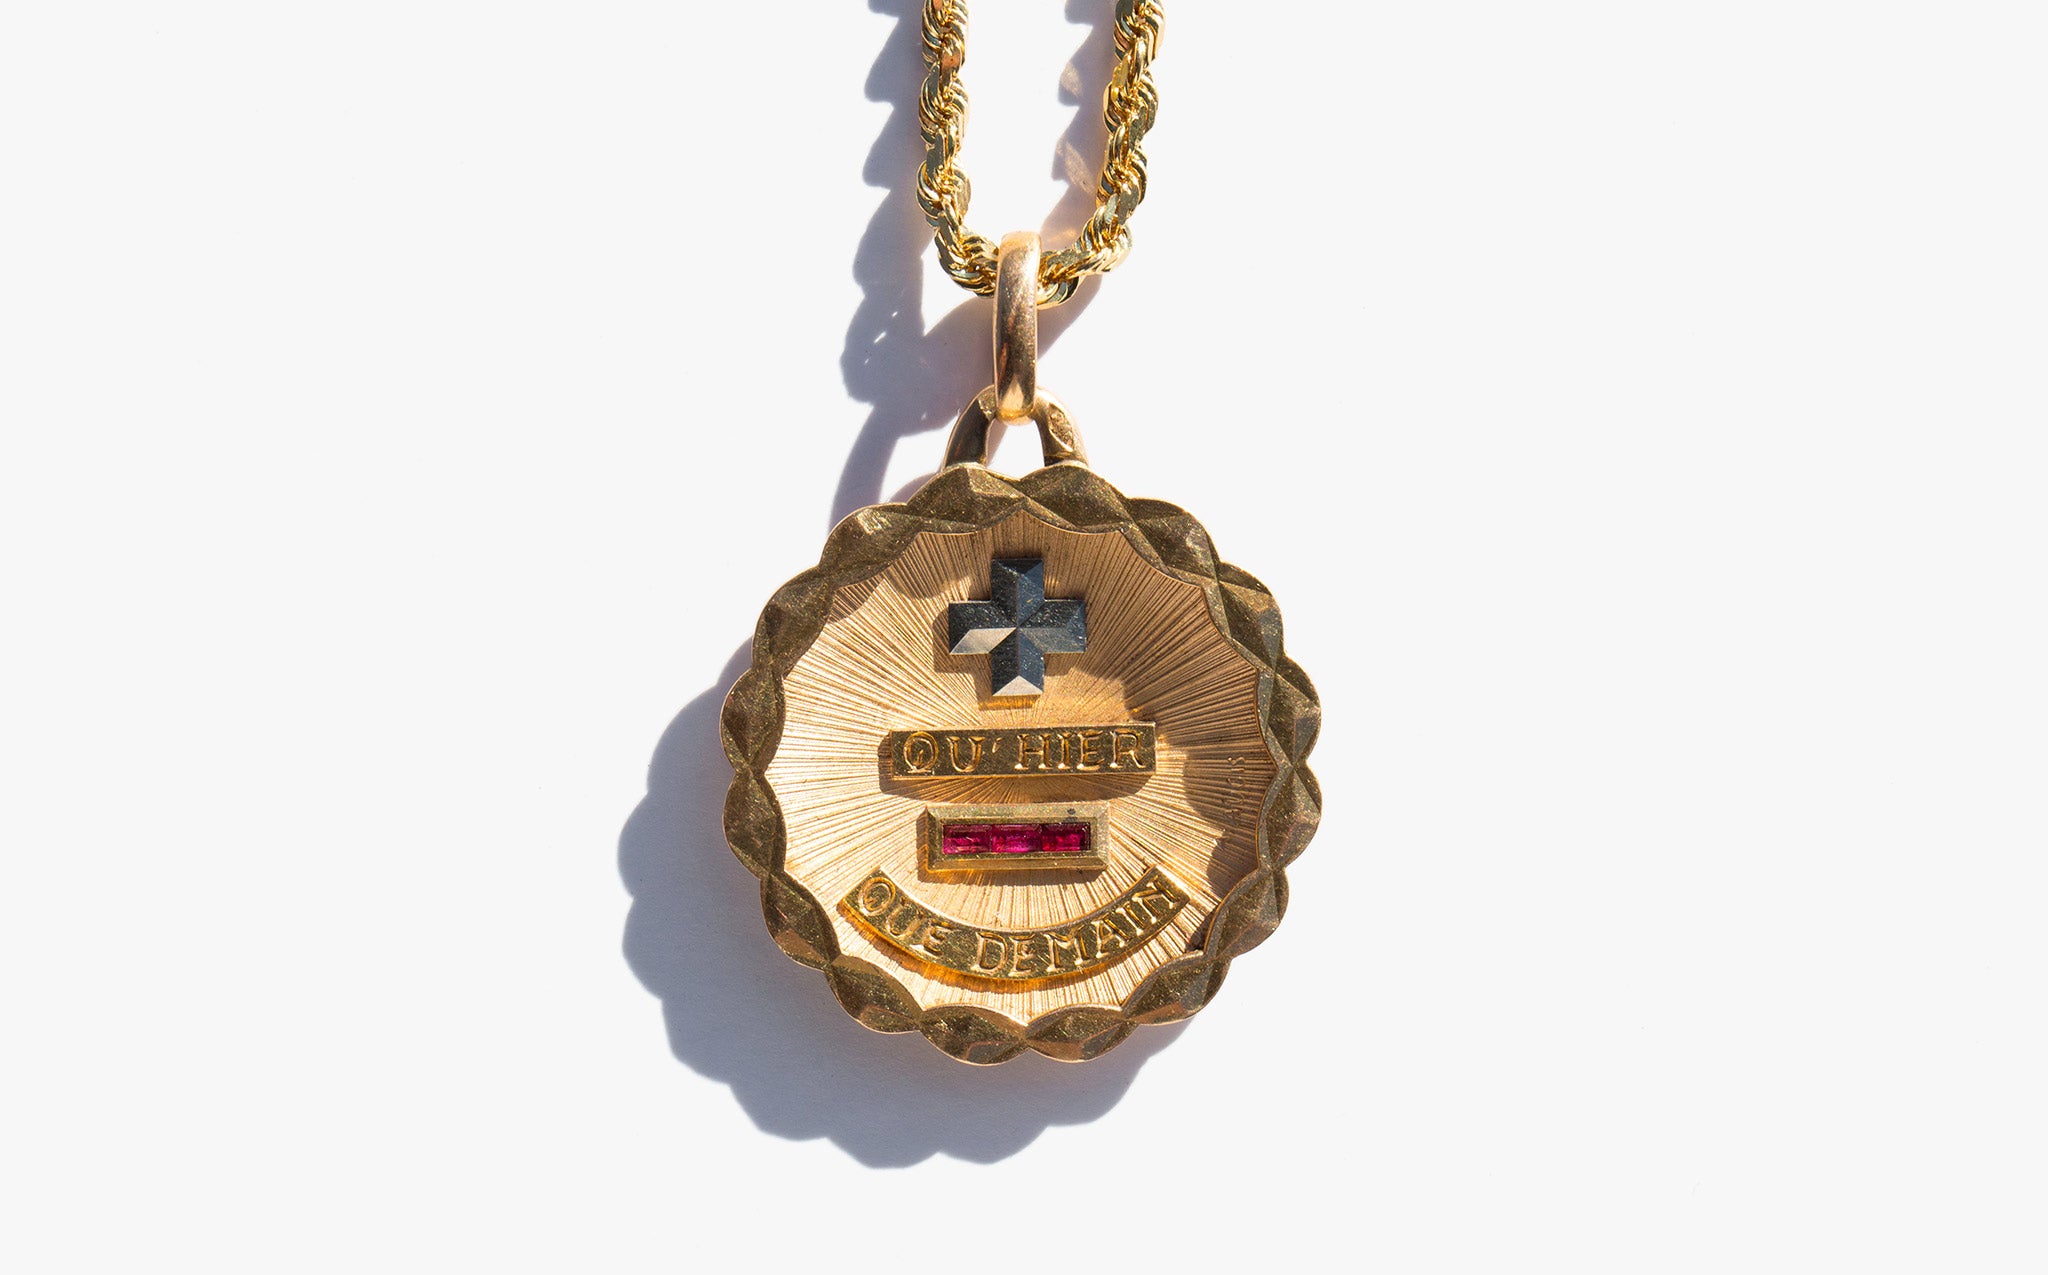 The Augis Medaille D'Amour